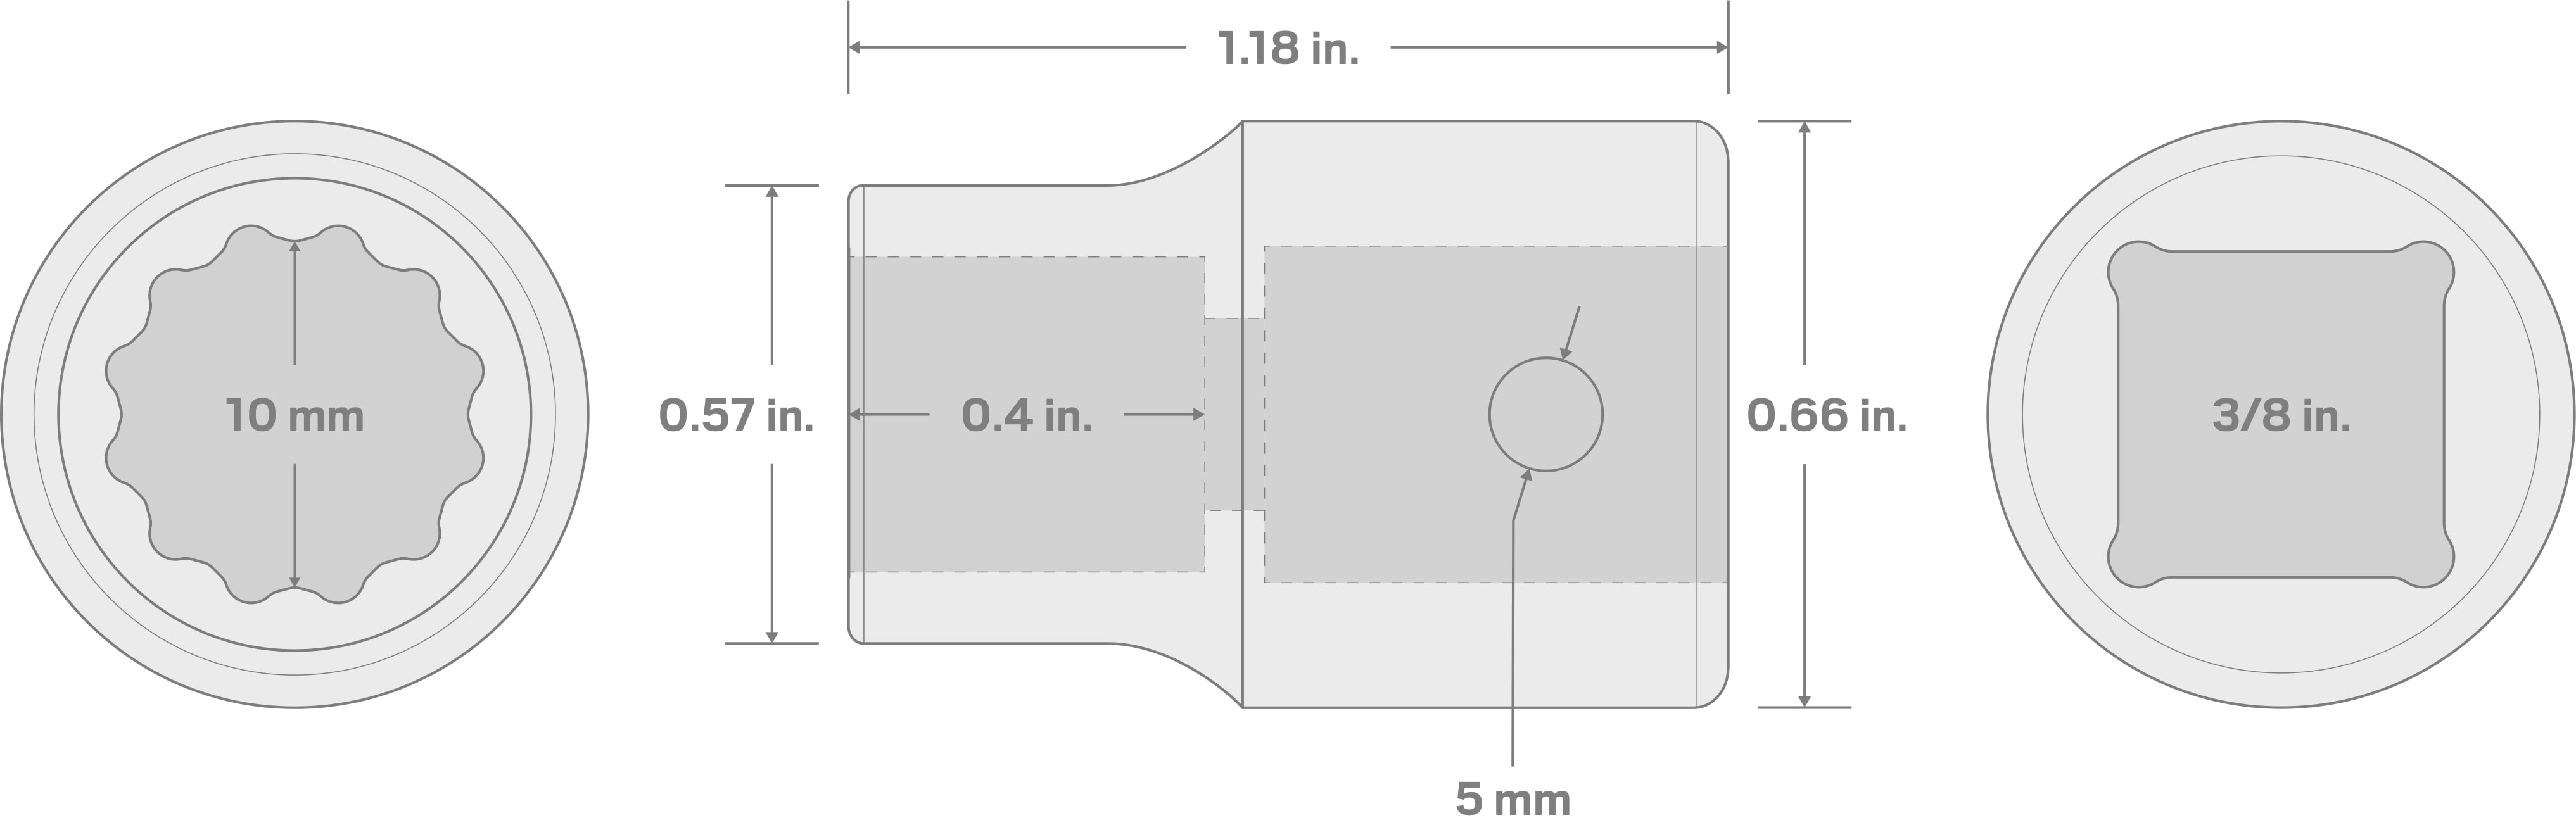 Specs for 3/8 Inch Drive x 10 mm 12-Point Impact Socket